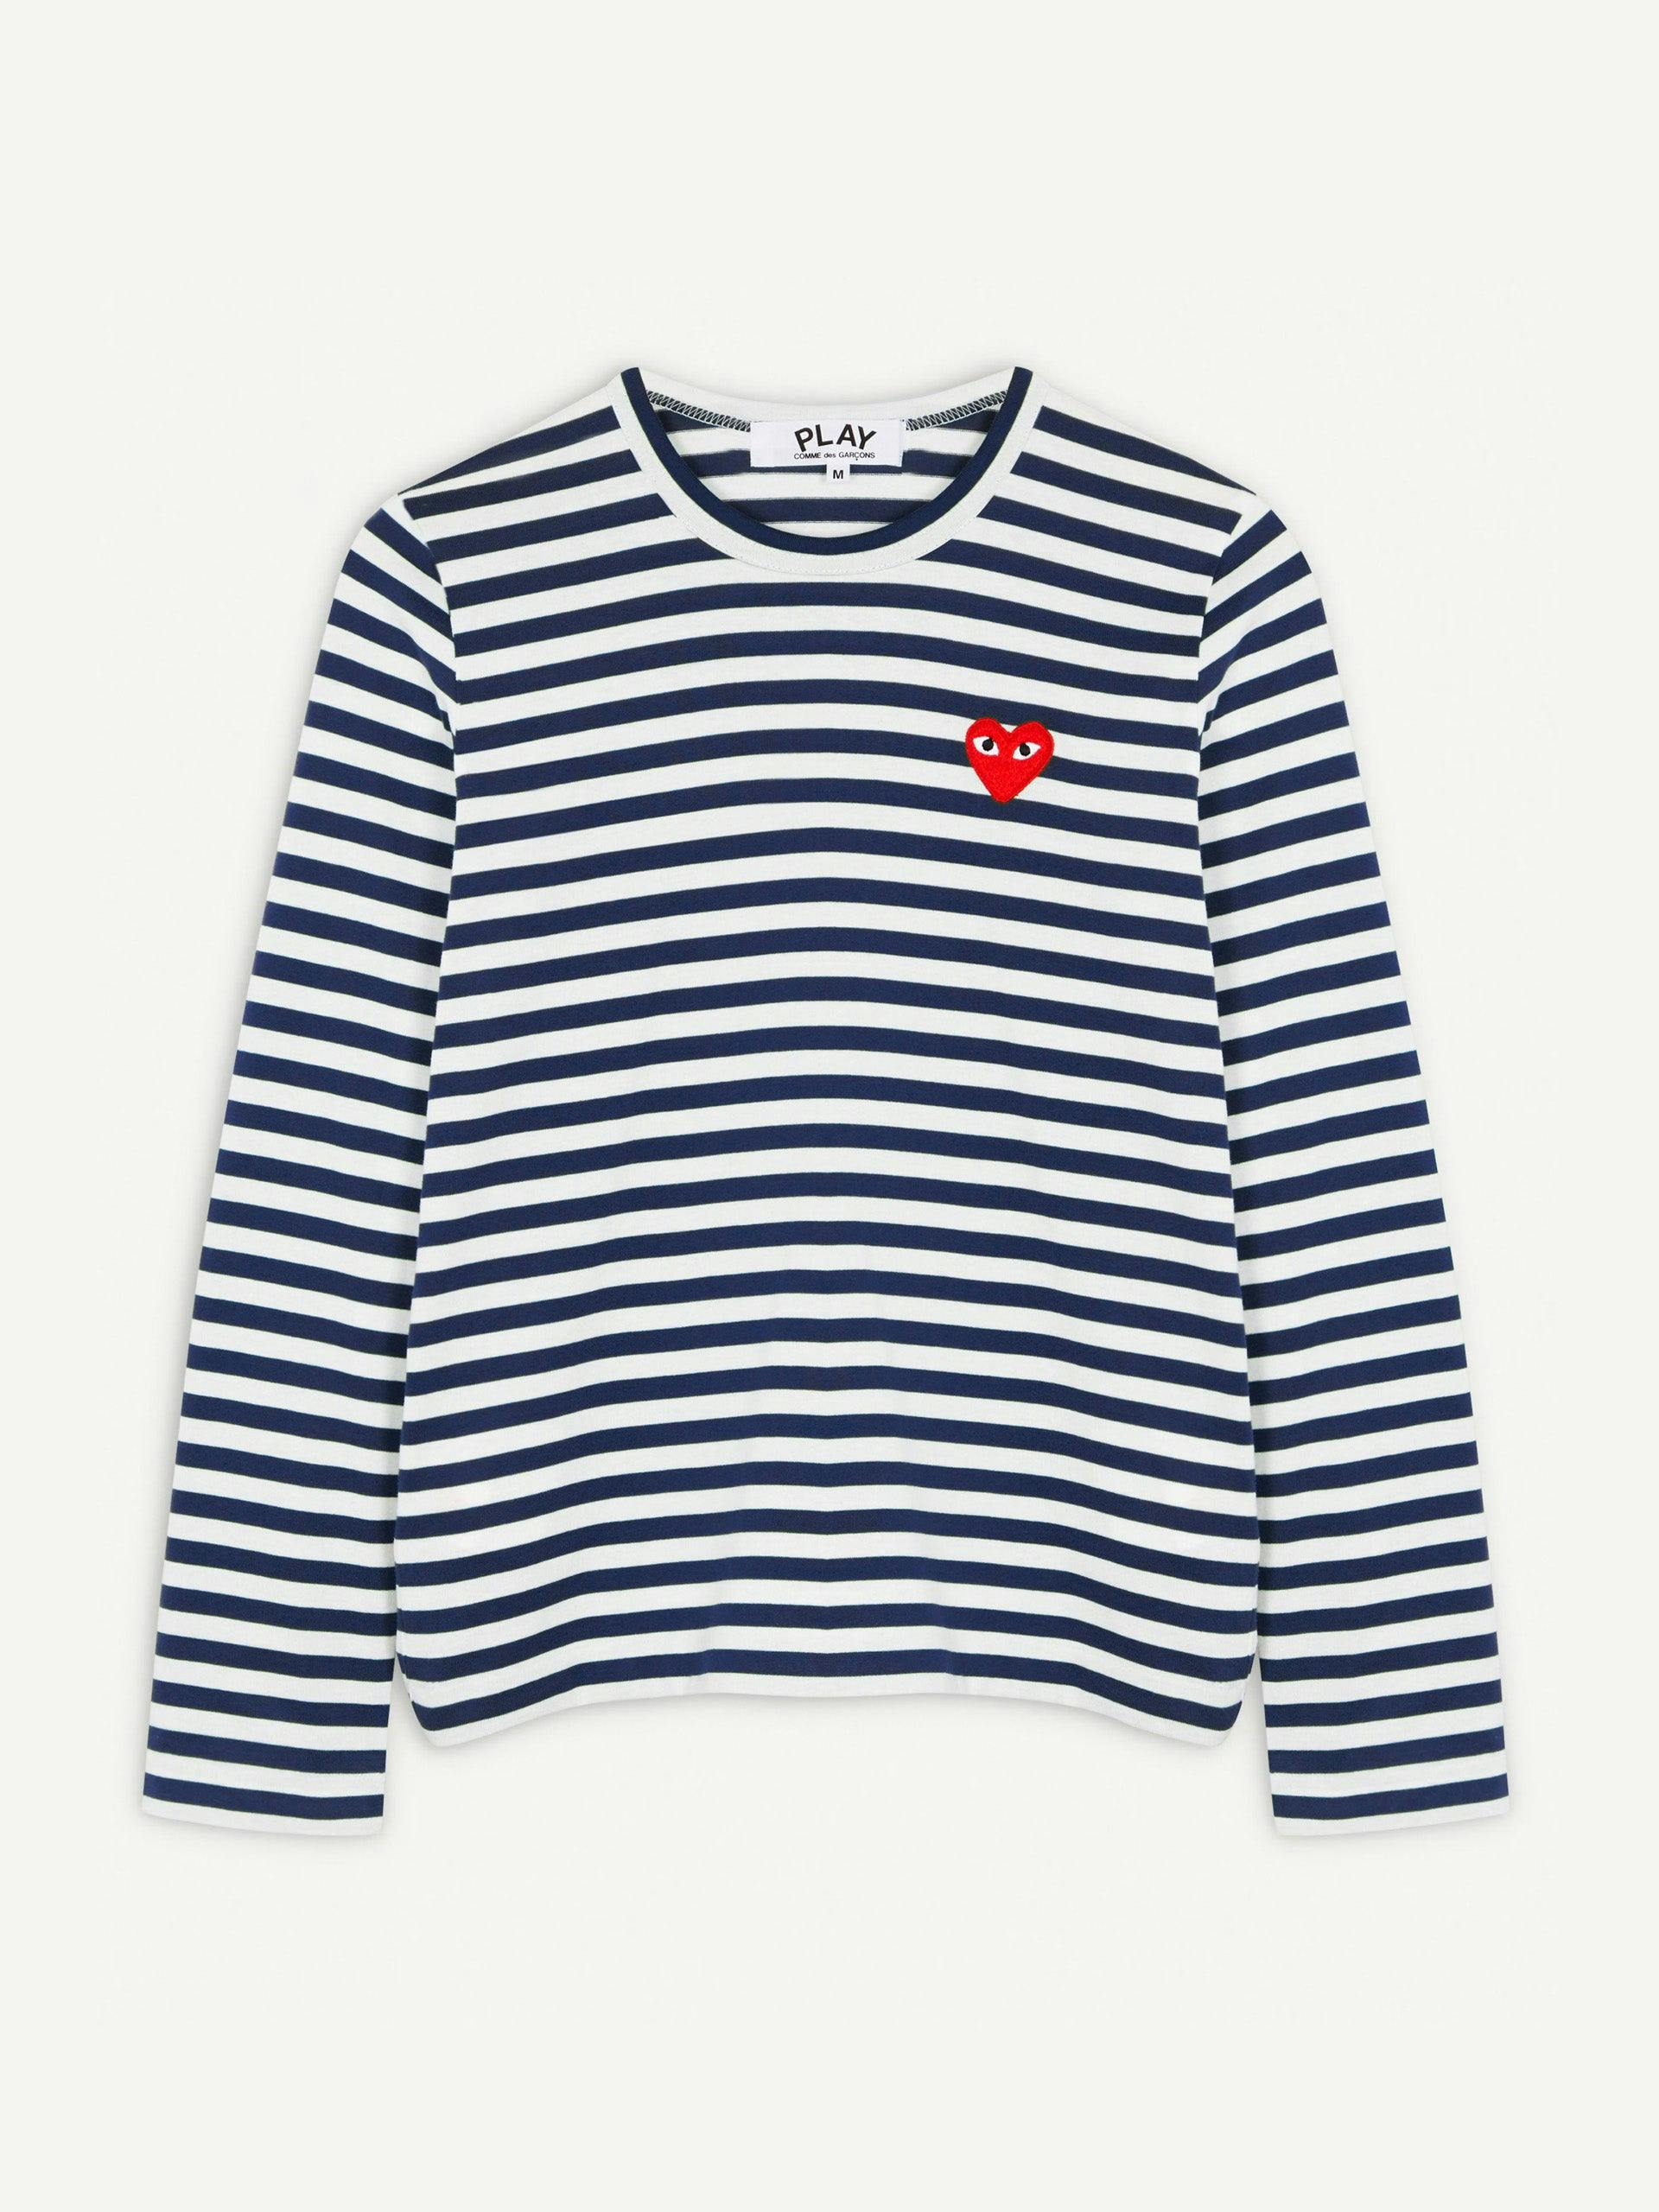 Navy and white striped long sleeve t-shirt